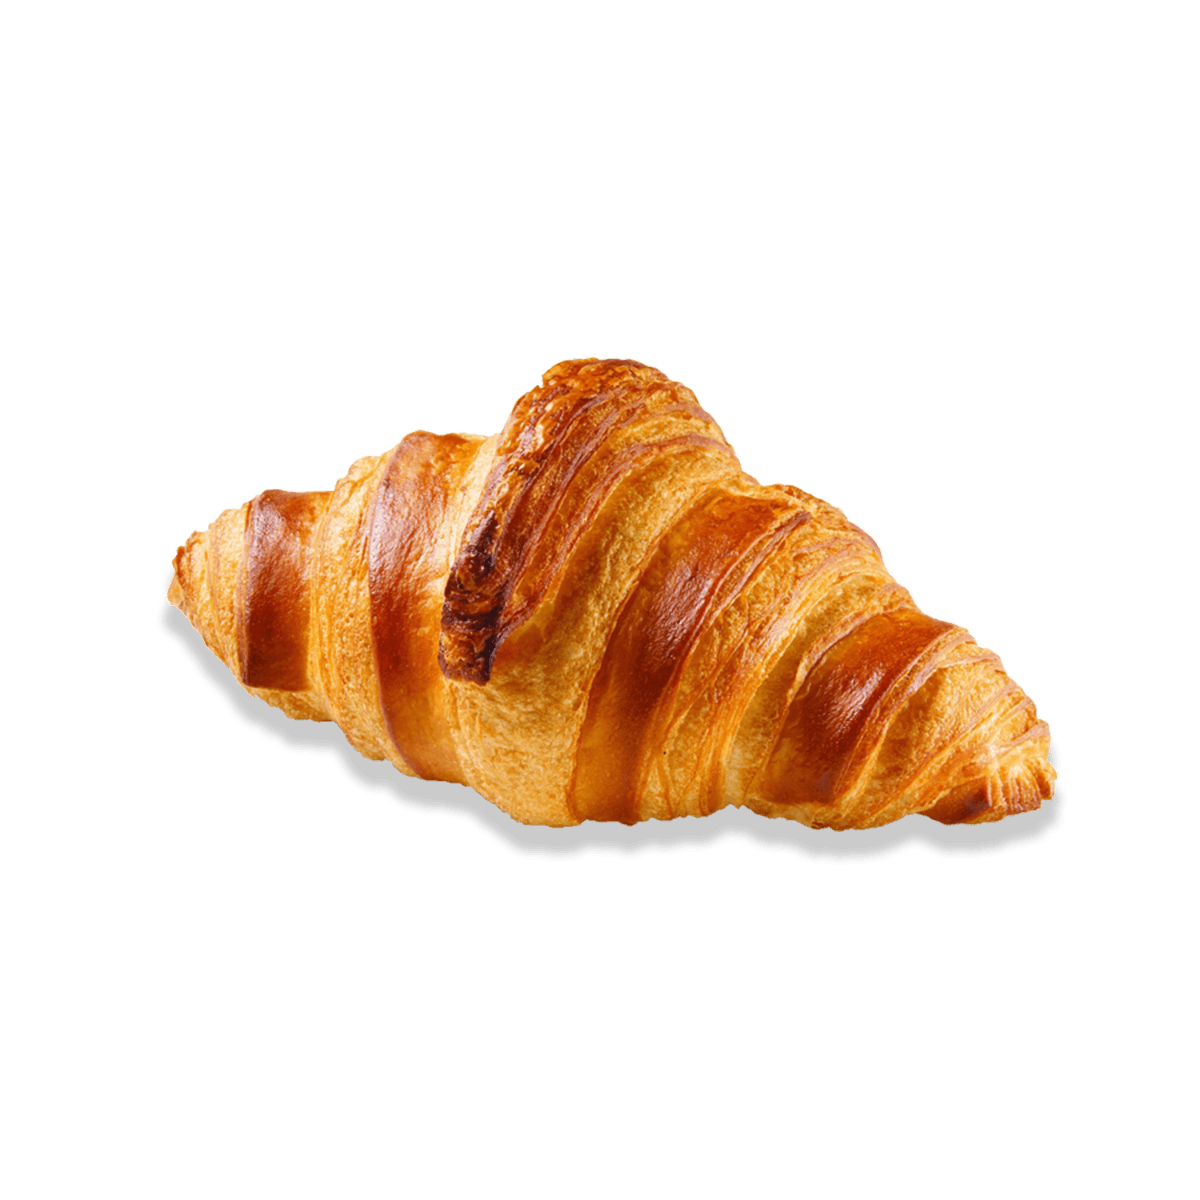 perfect croissant on the side